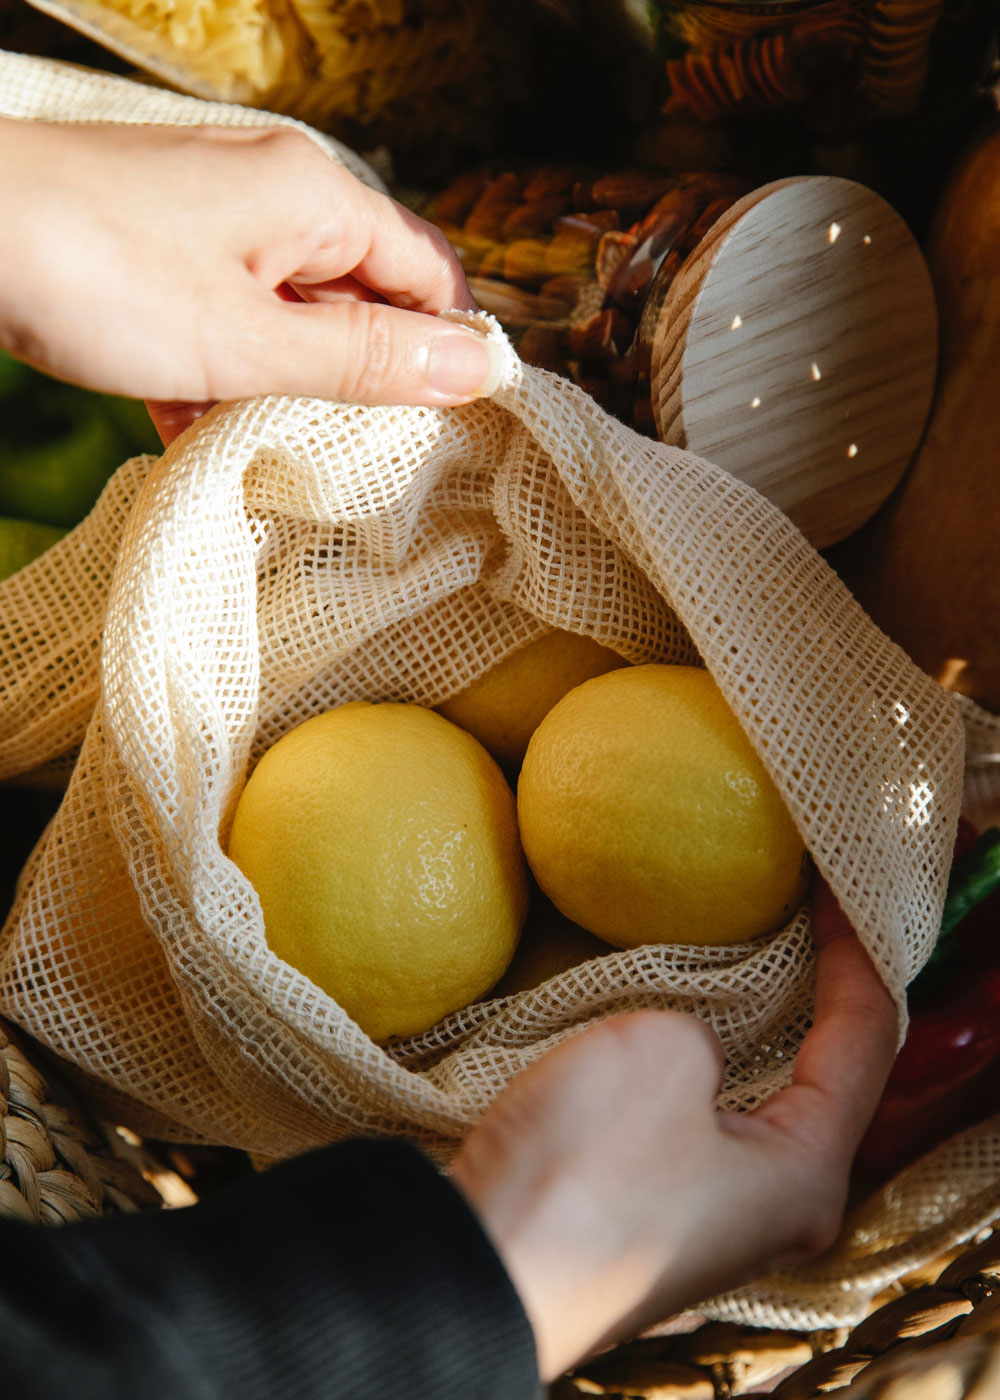 A woman's hands open a cotton reusable bag to reveal fresh lemons. In the background are more farmers market finds.